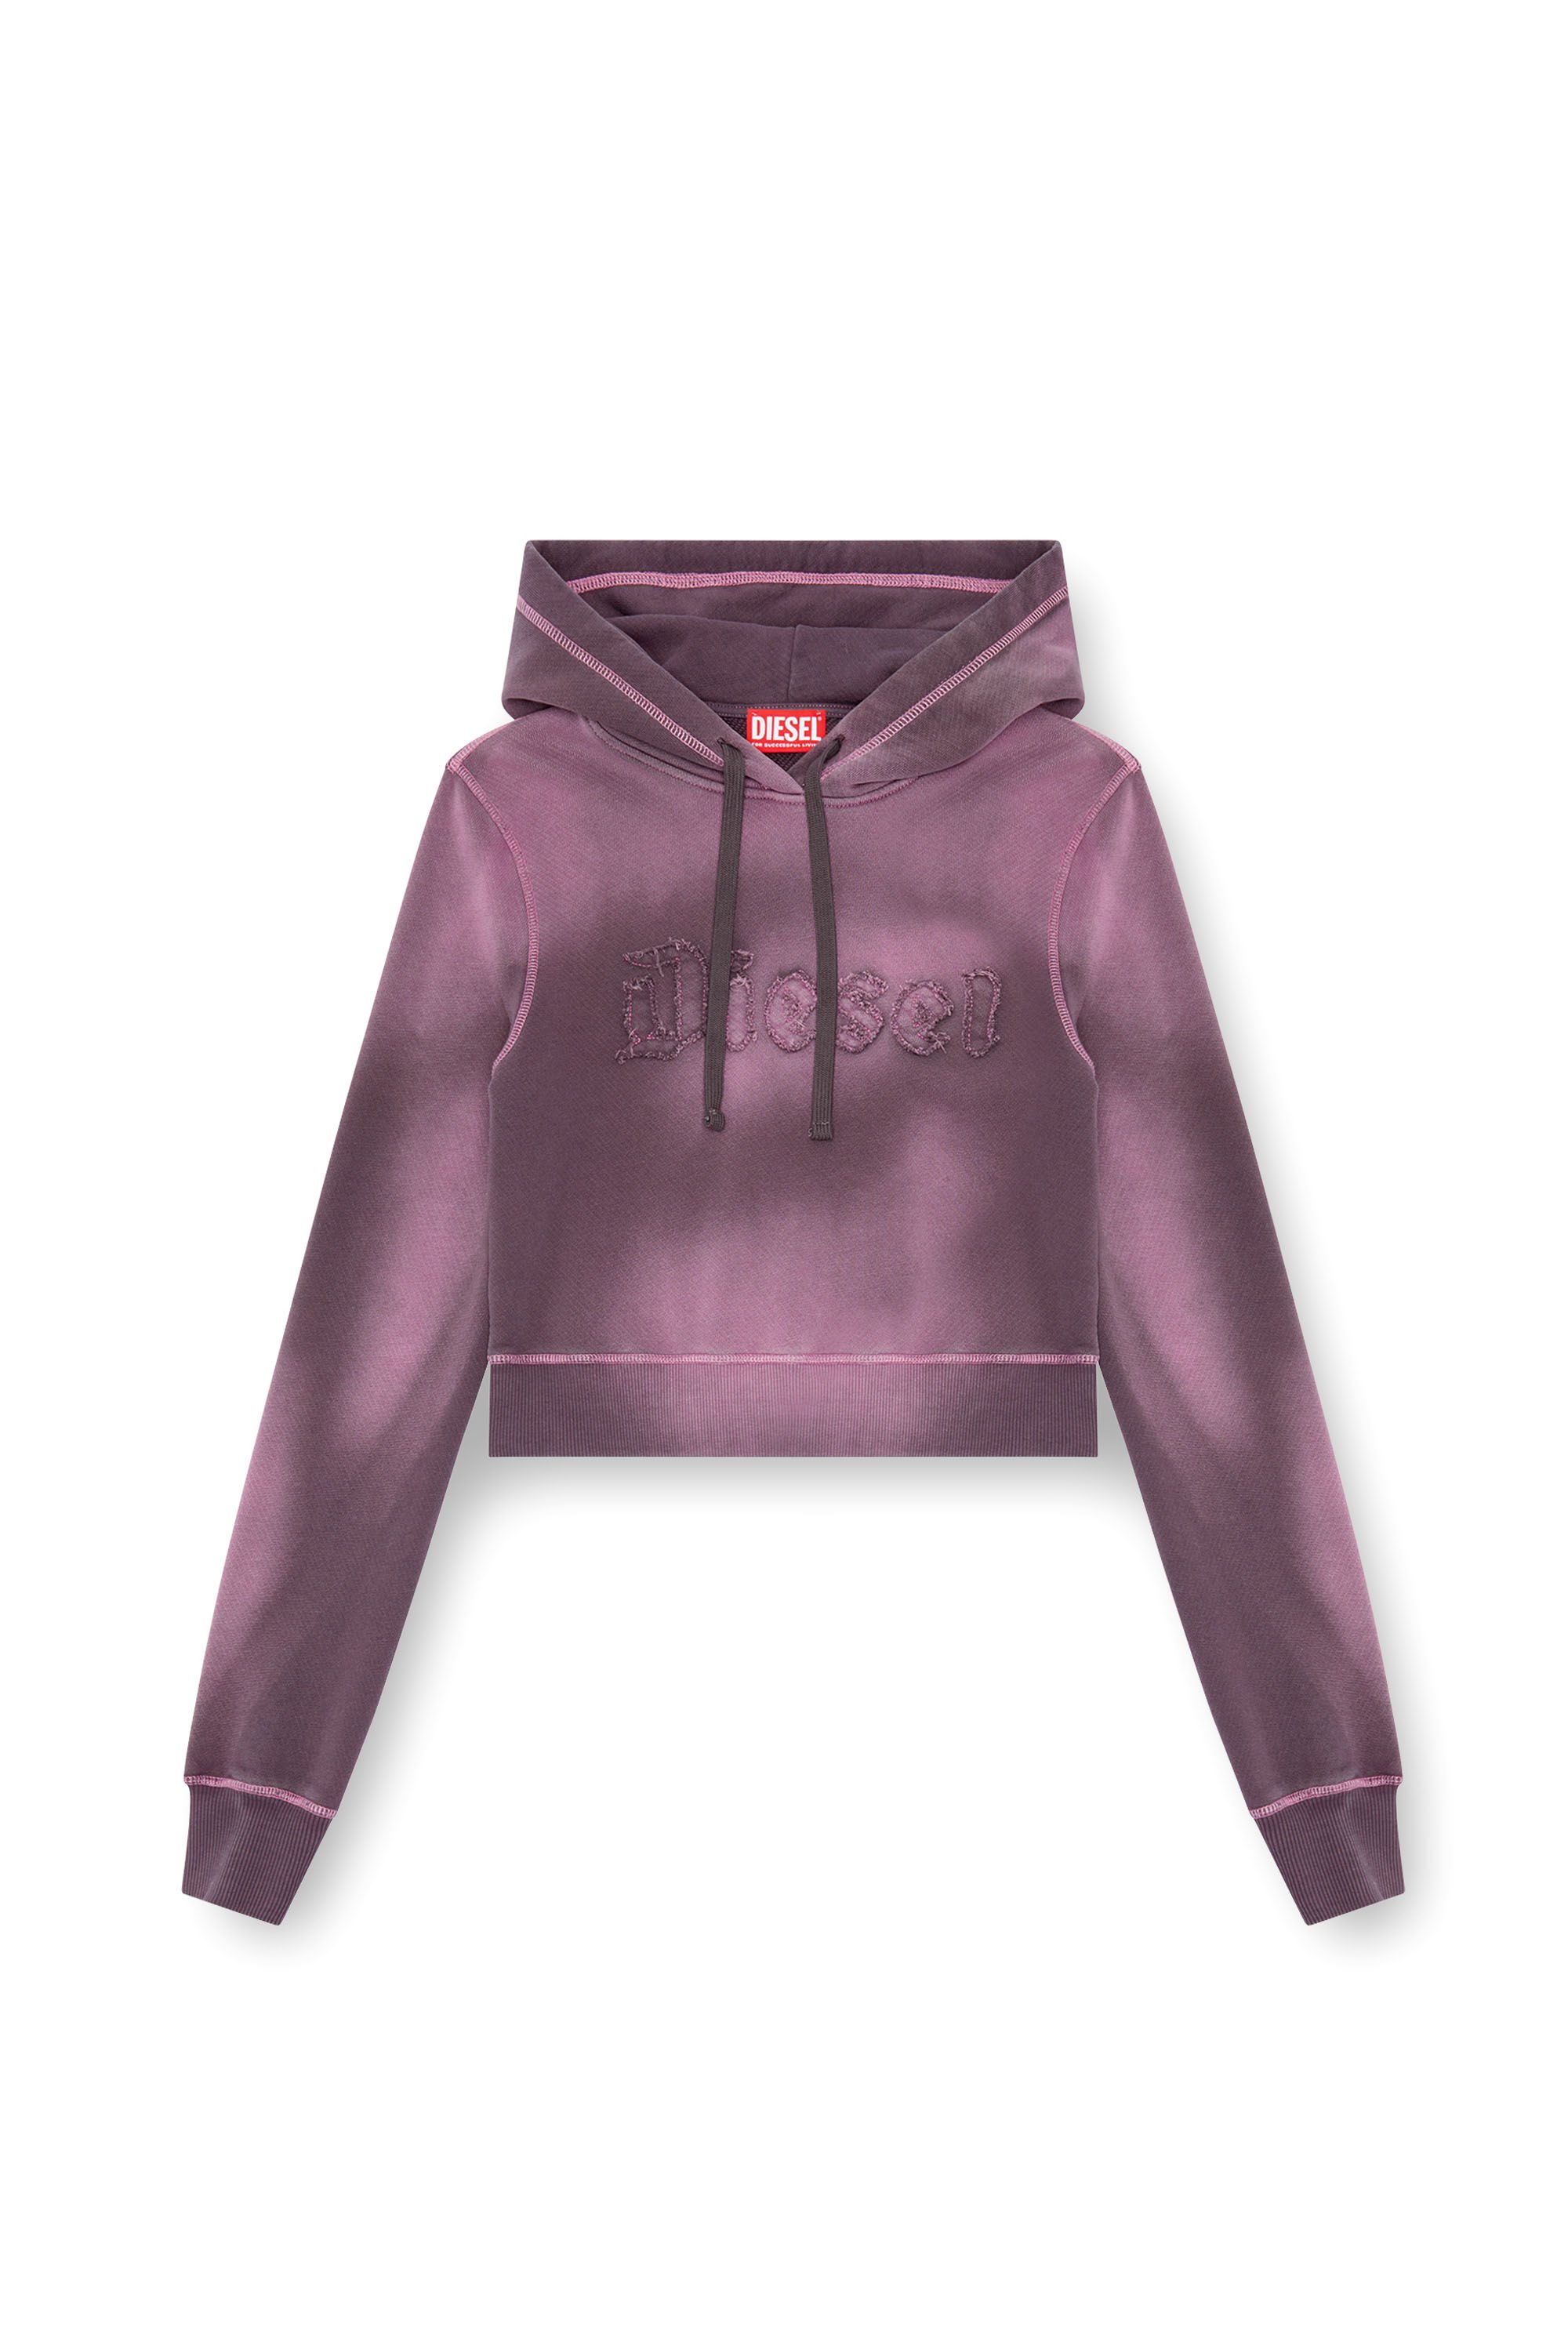 Diesel - F-SLIMMY-HOOD-P1, Woman Overdyed hoodie with frayed logo in Violet - Image 2